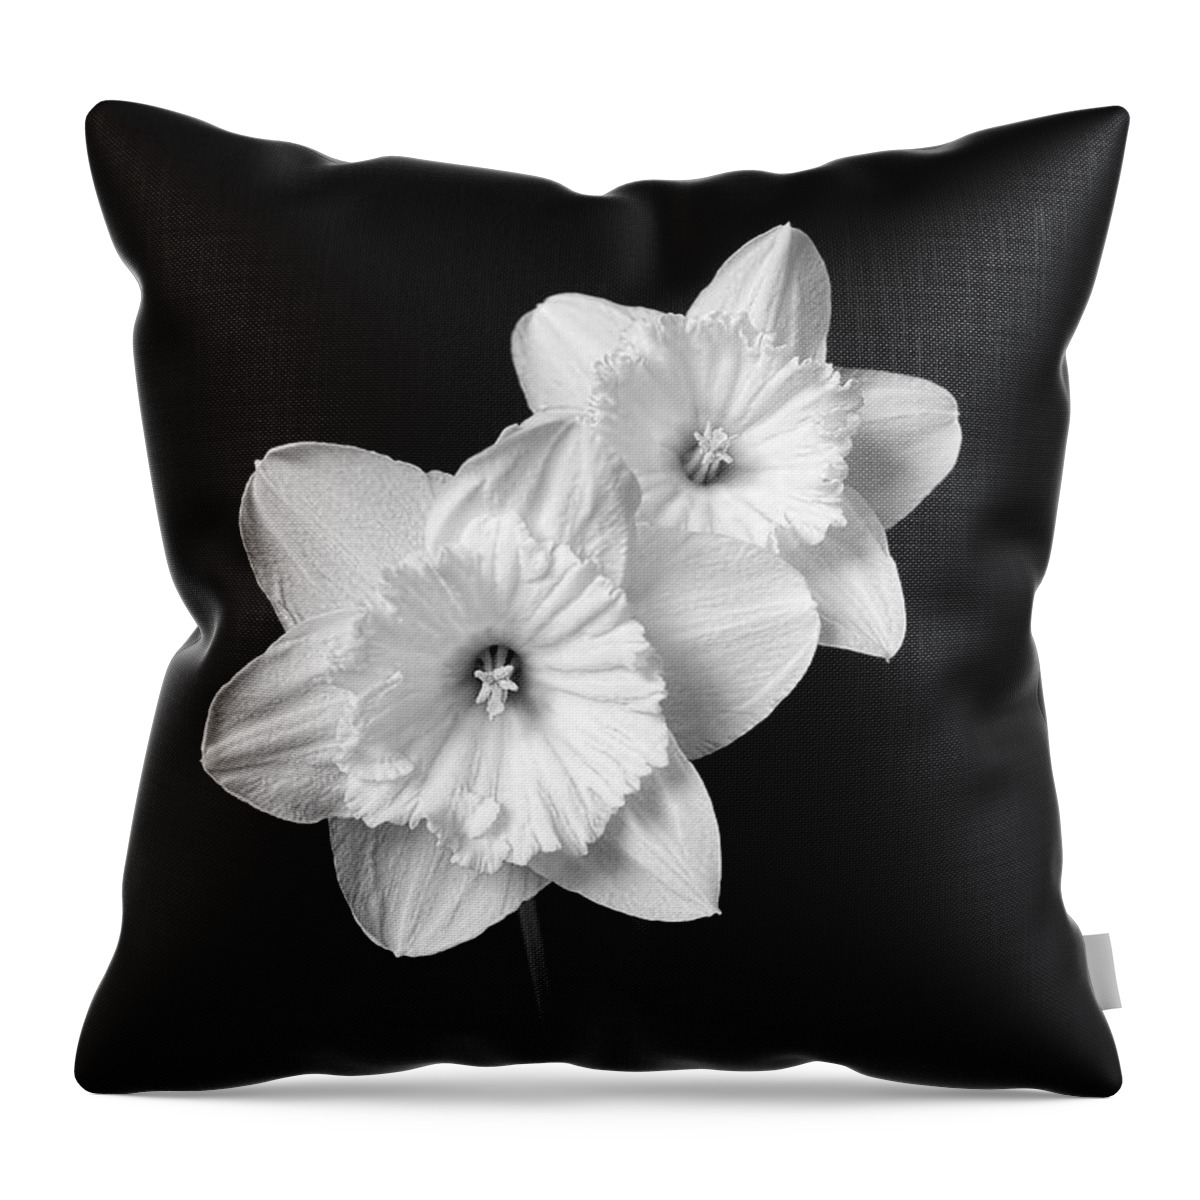 Daffodil Throw Pillow featuring the photograph Daffodil Flowers Black and White by Jennie Marie Schell